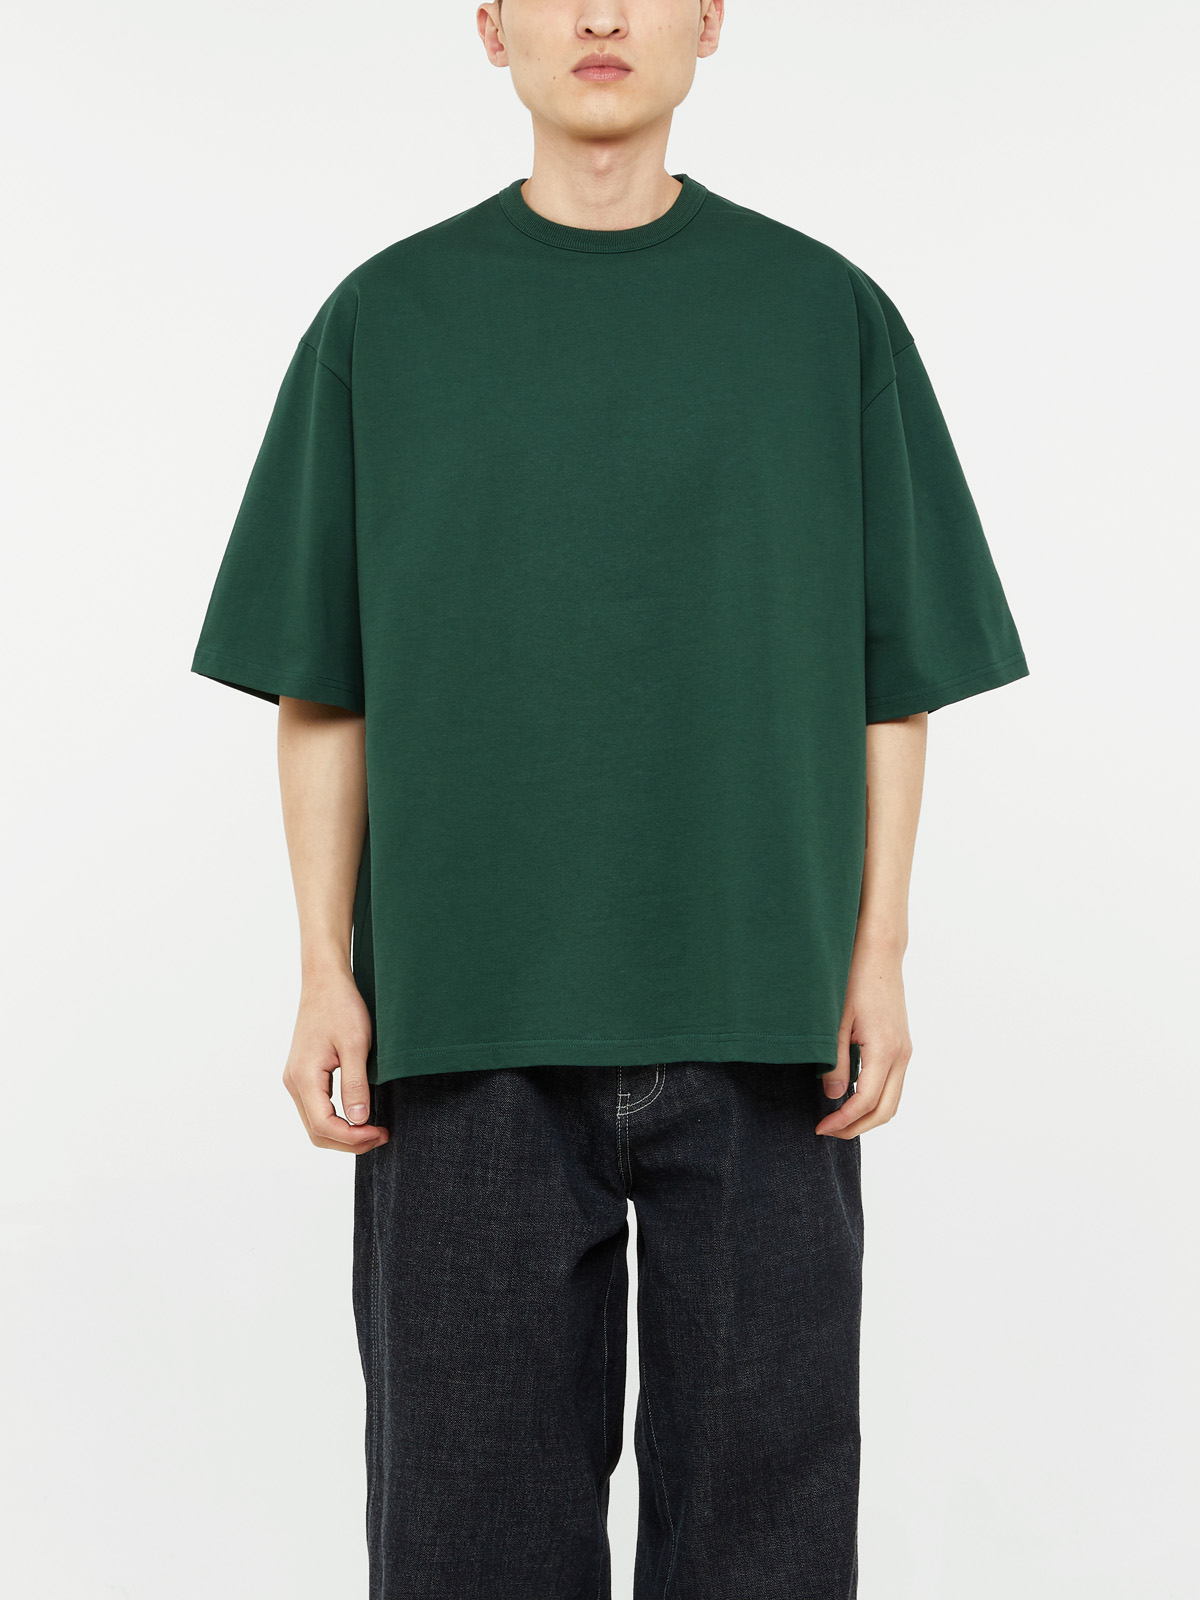 WIDE S/S T-SHIRT (FOREST GREEN)